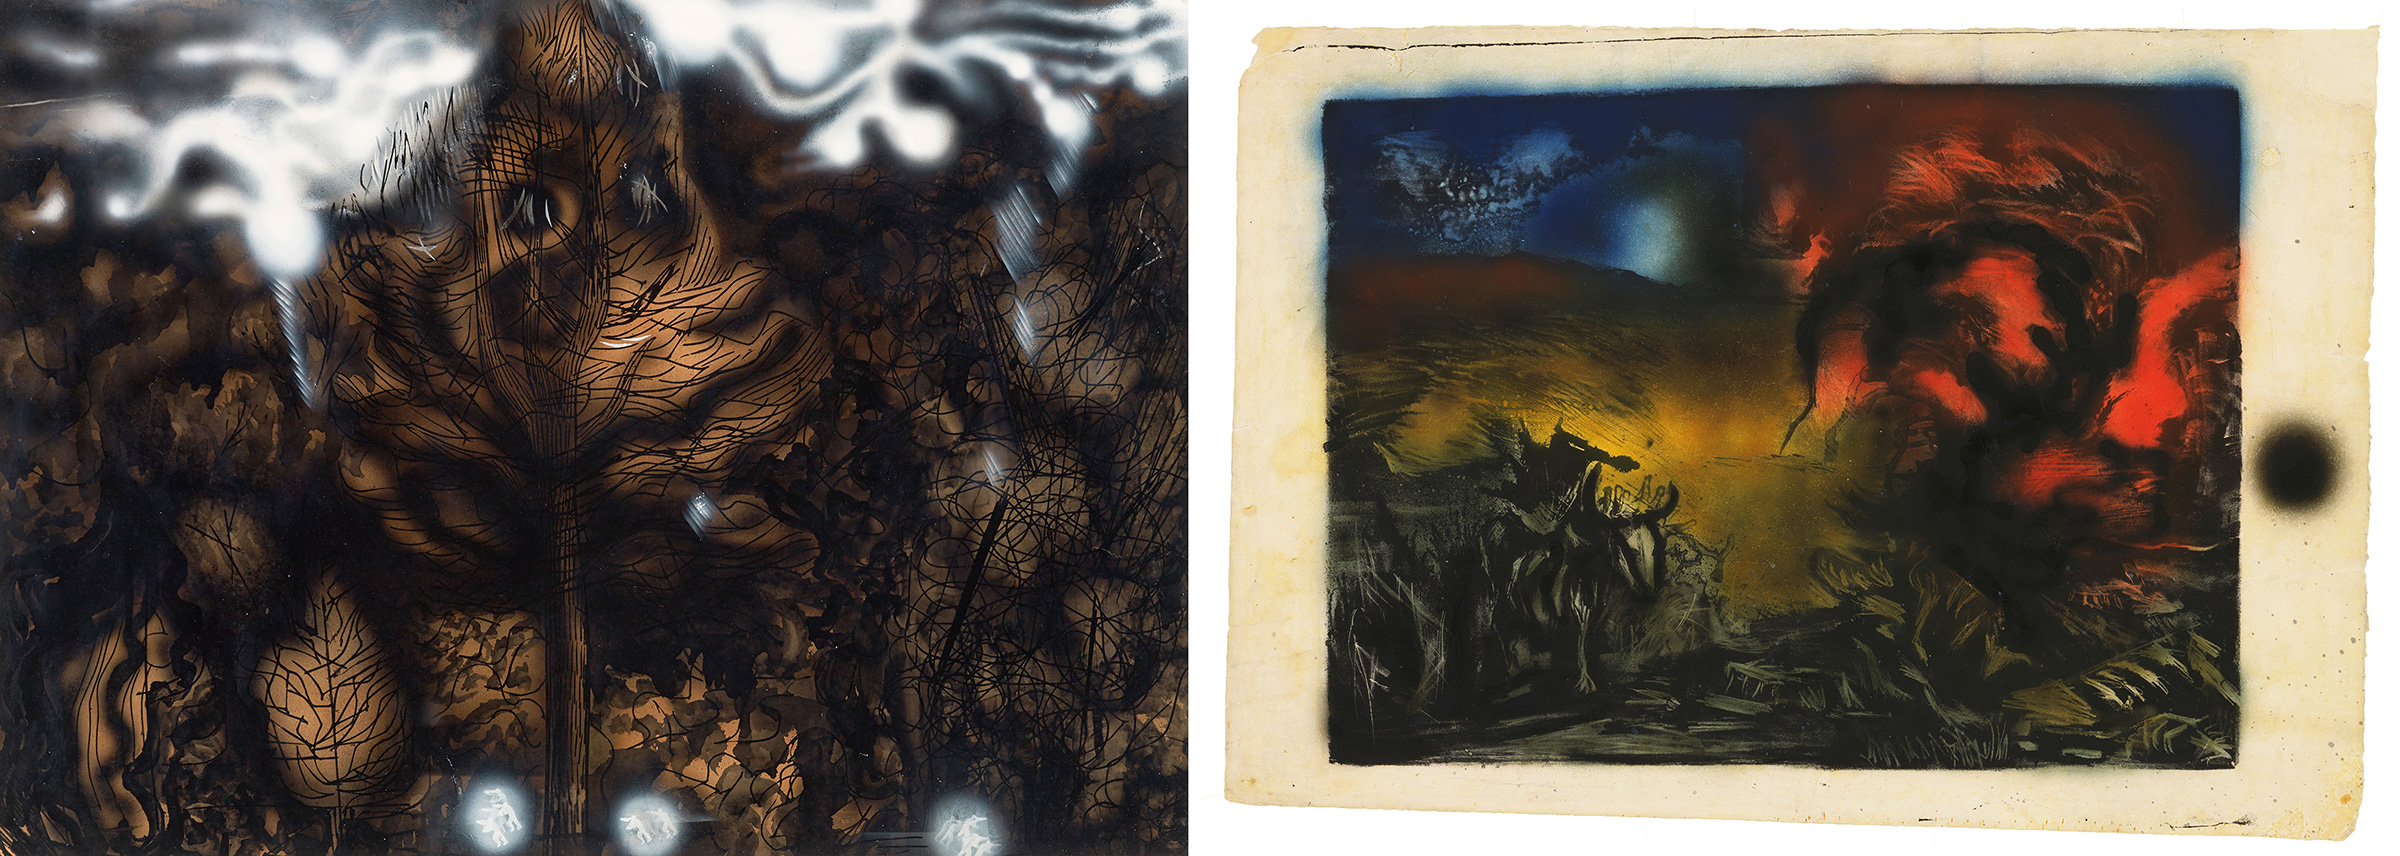 Left: David Alfaro Siqueiros, The Electric Forest, 1939; Right: Jackson Pollock, Landscape with Steer, 1936–37